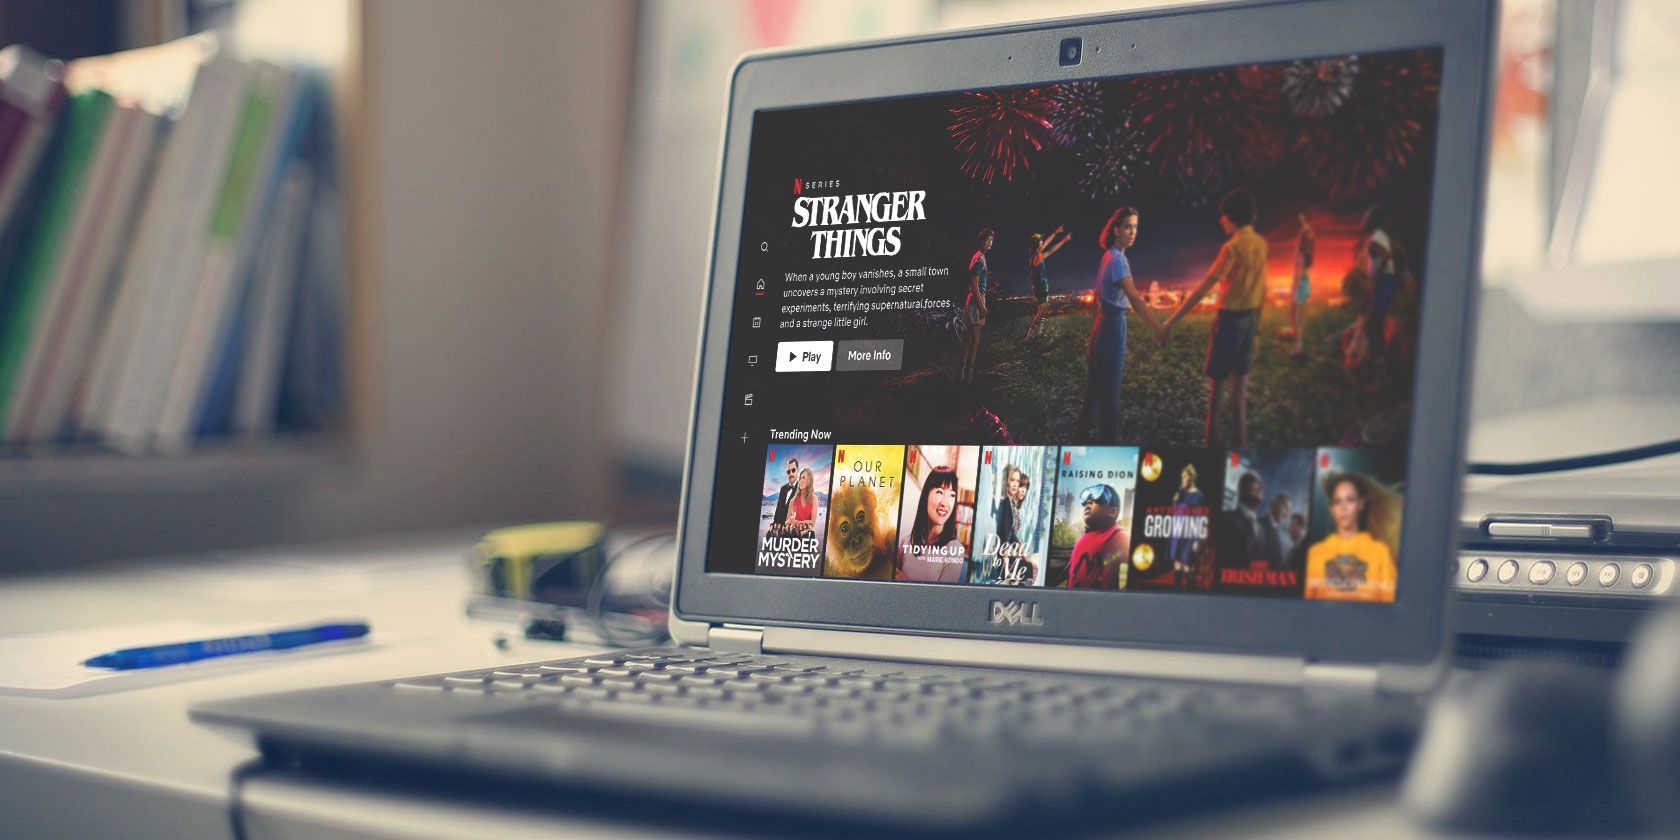 Where to Find the Netflix Download Folder on Windows 10